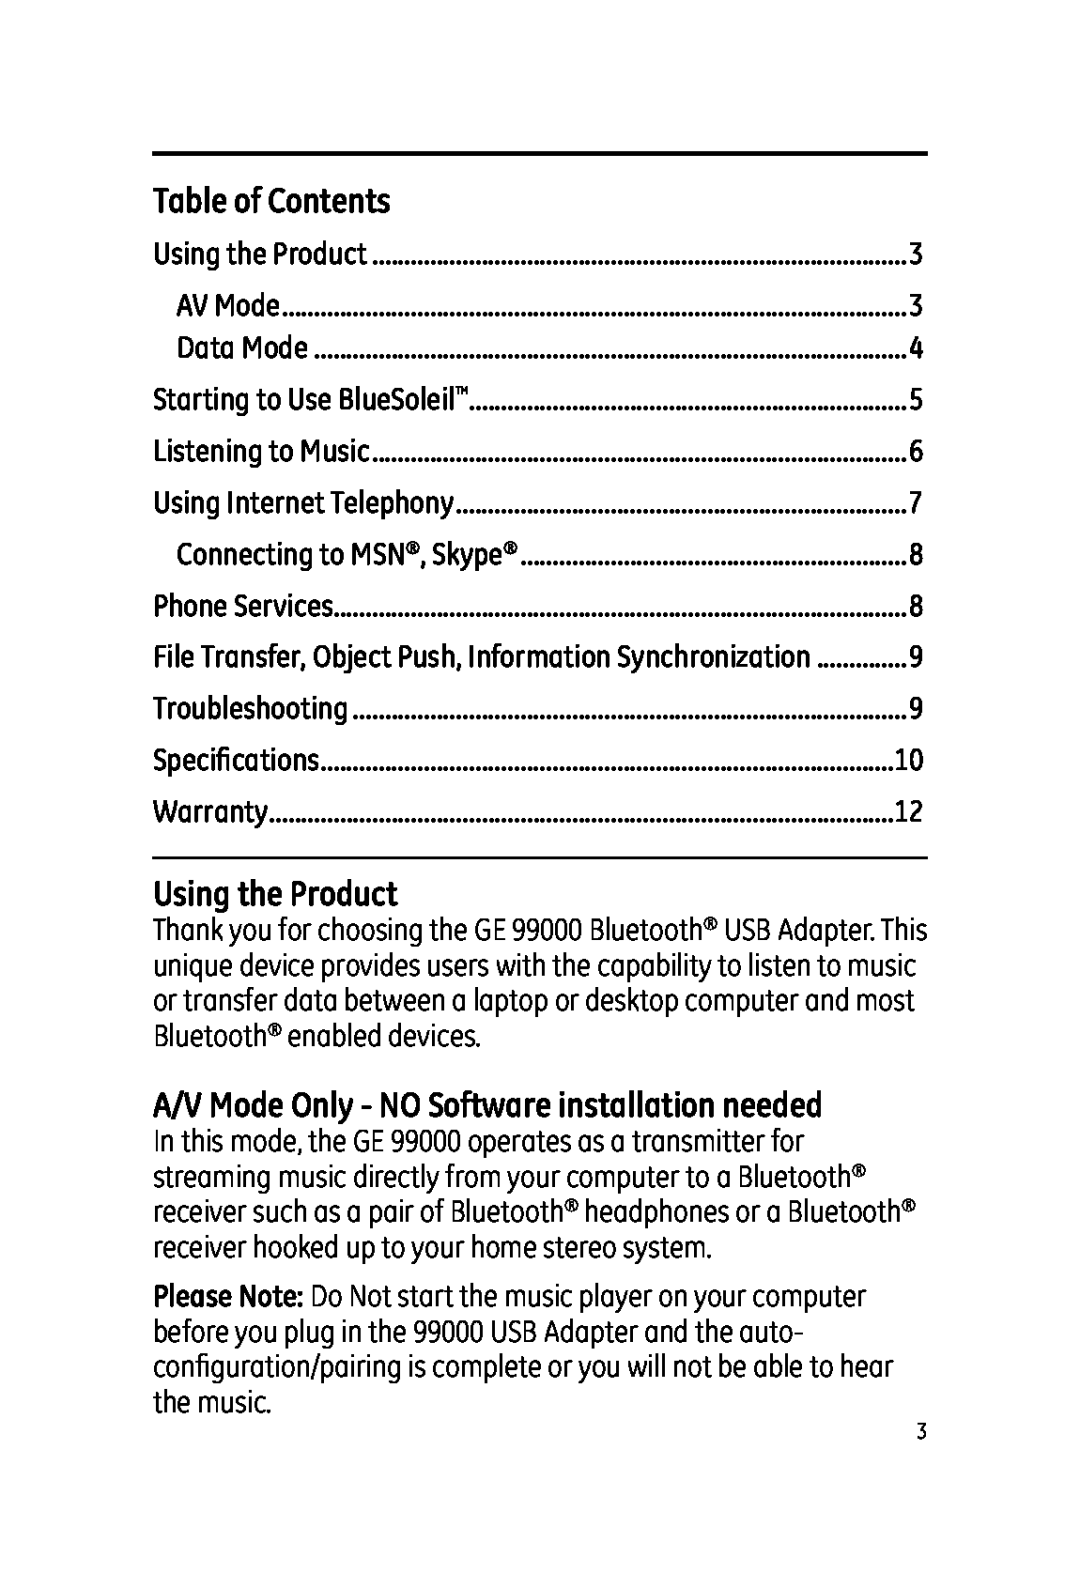 Jasco 99000 user manual Table of Contents, Using the Product, A/V Mode Only - NO Software installation needed 